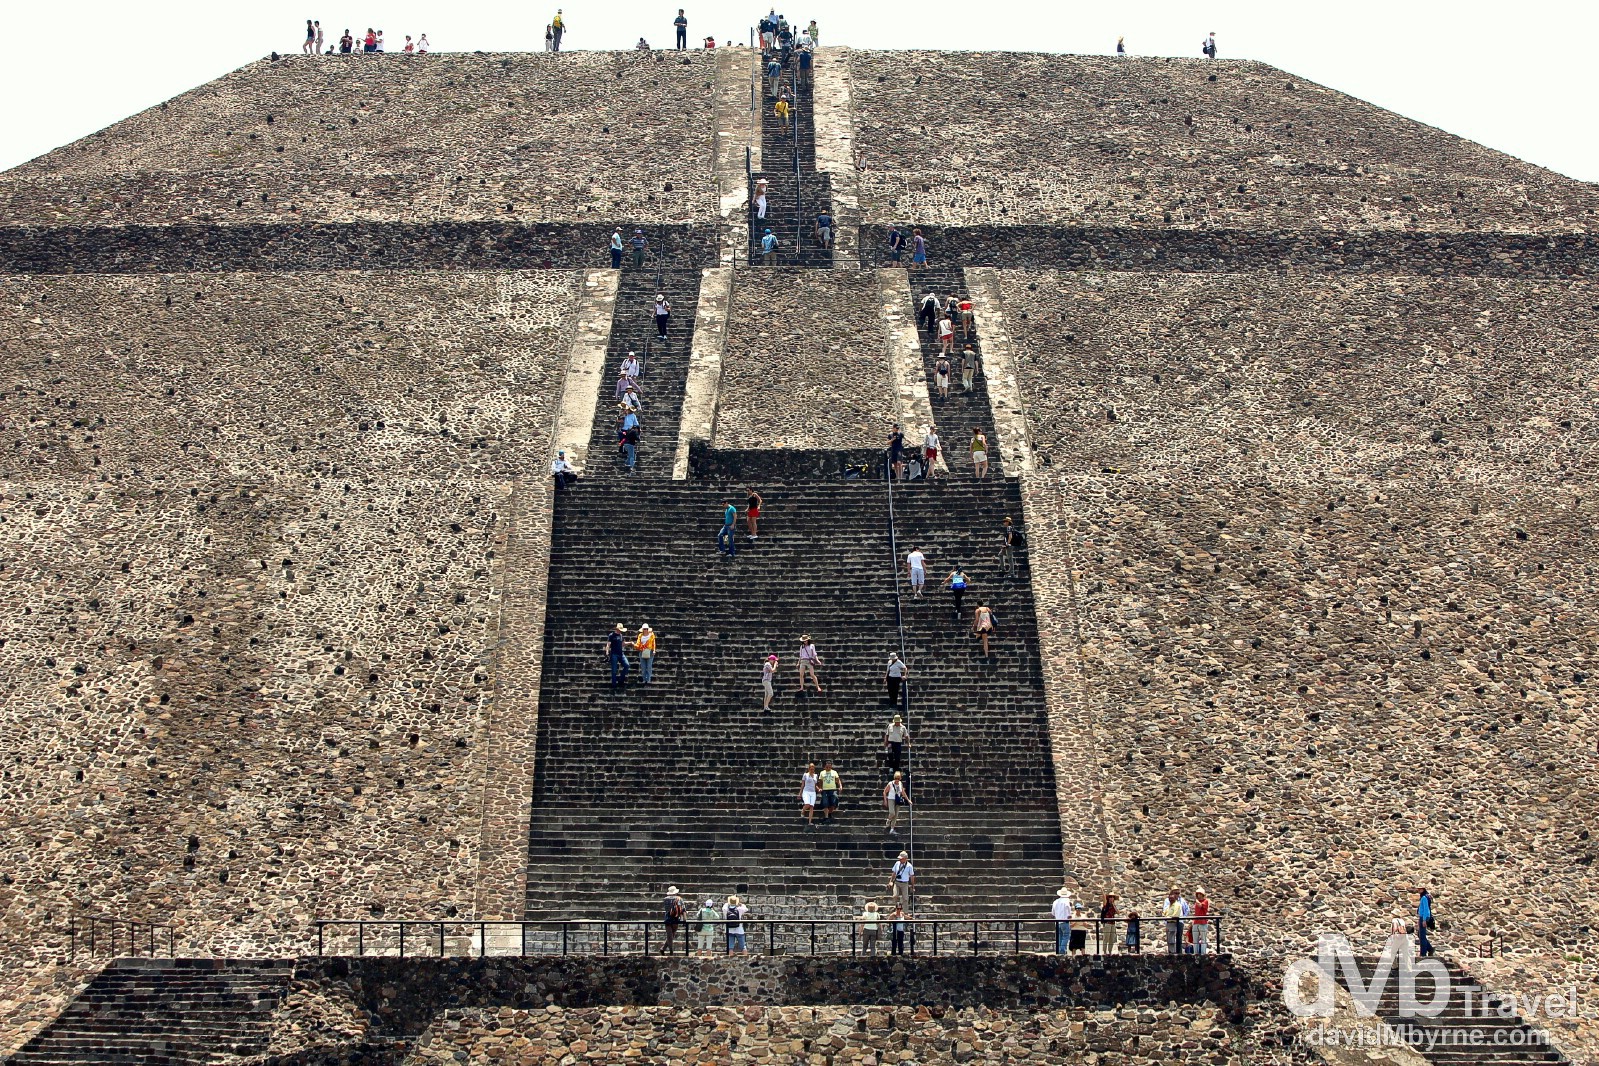 Scaling the Piramide del Sol (Pyramid of the Sun), the third largest pyramid in the world. Teotihuacan, Mexico. April 29th 2013.